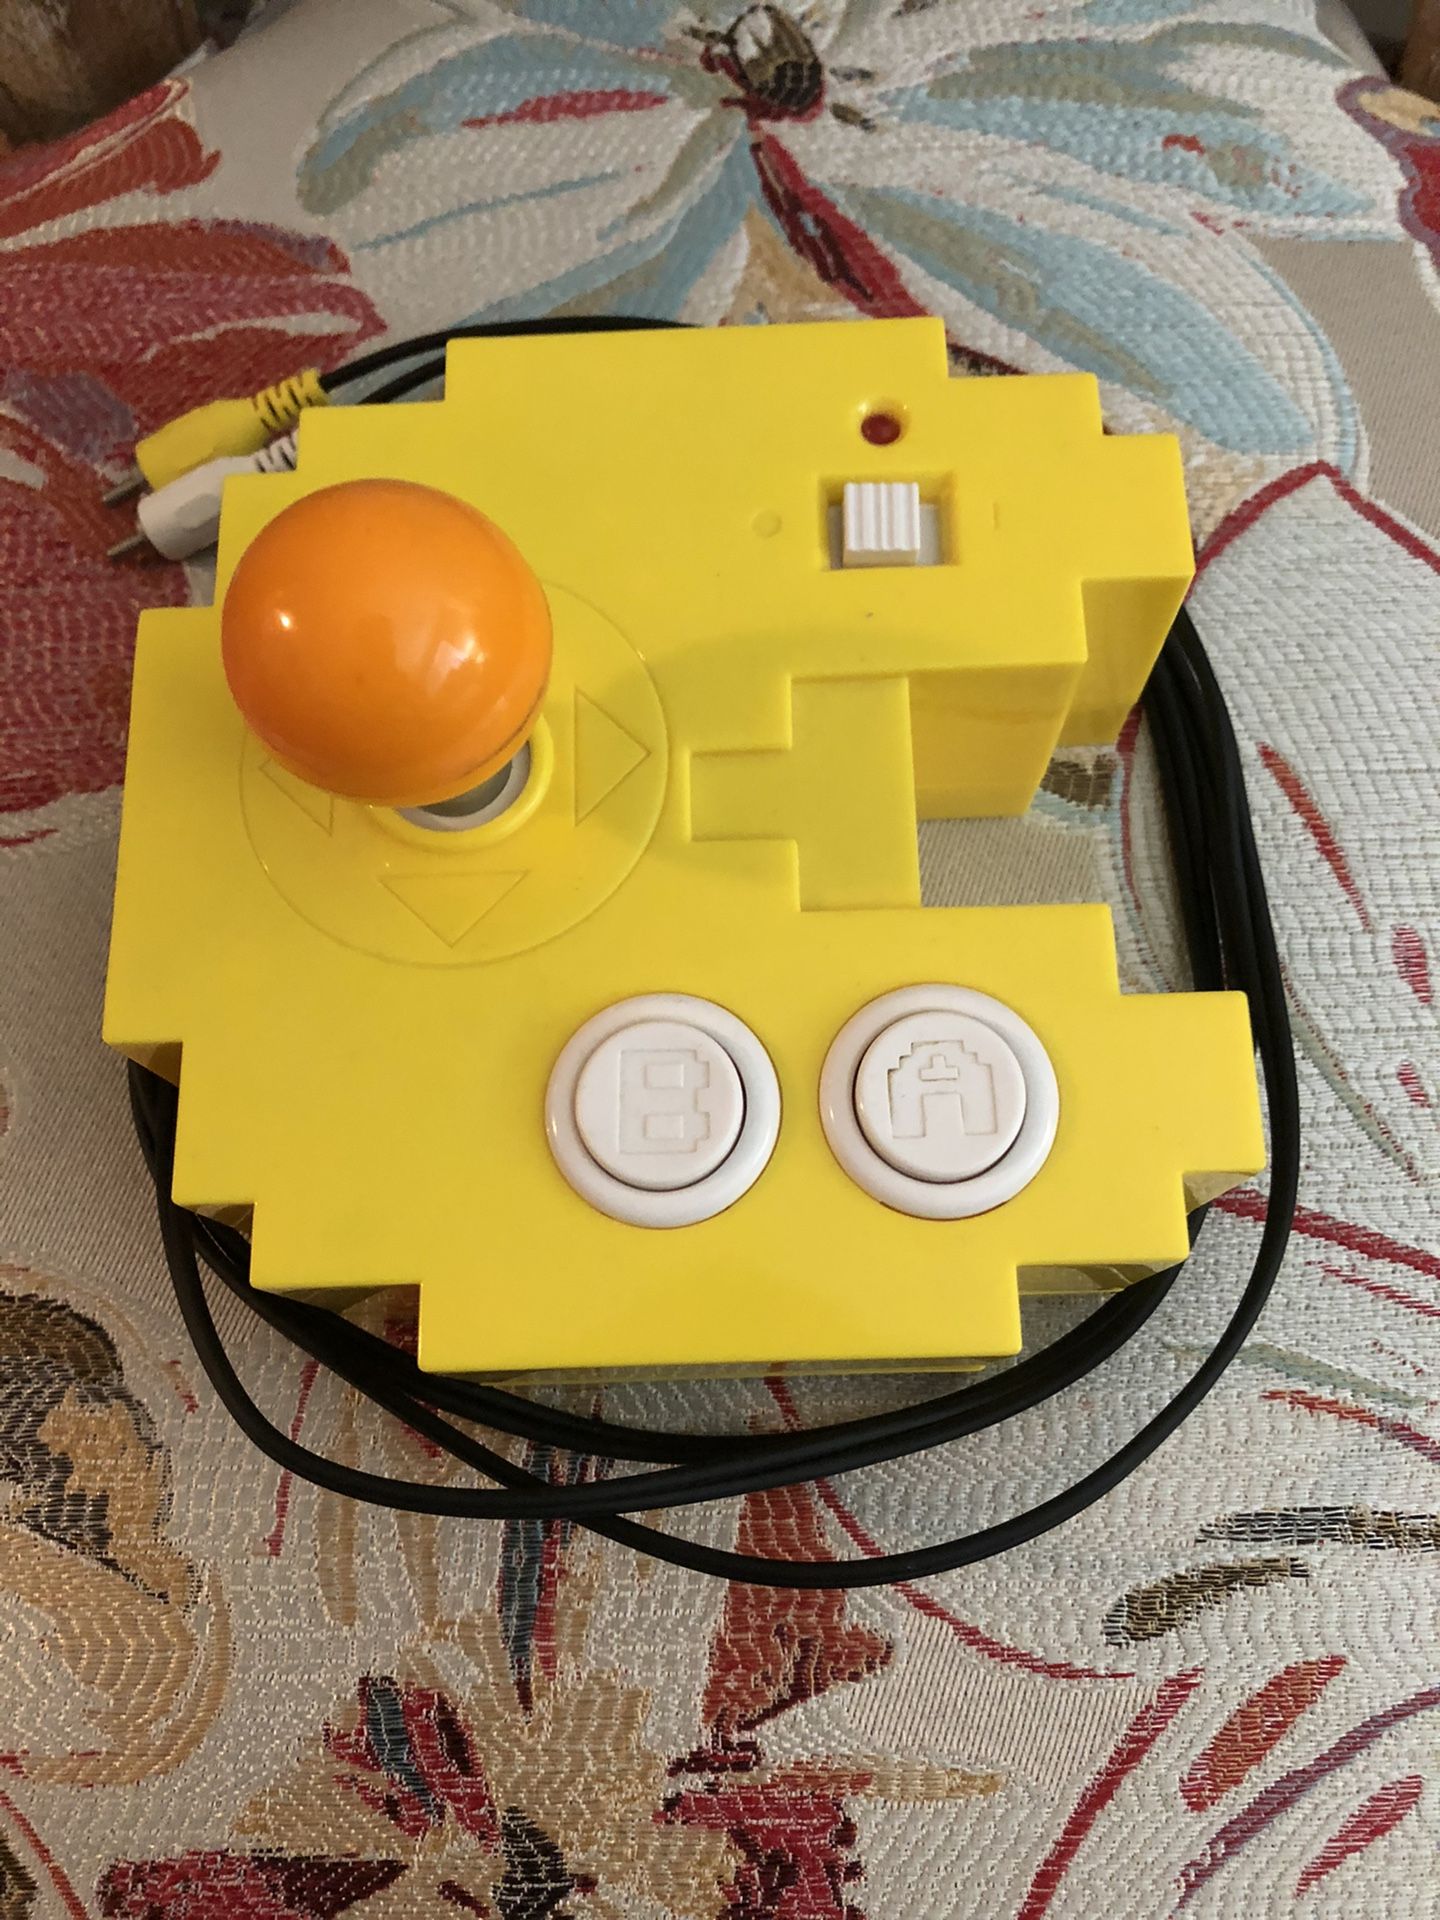 PAC MAN Connect & Play